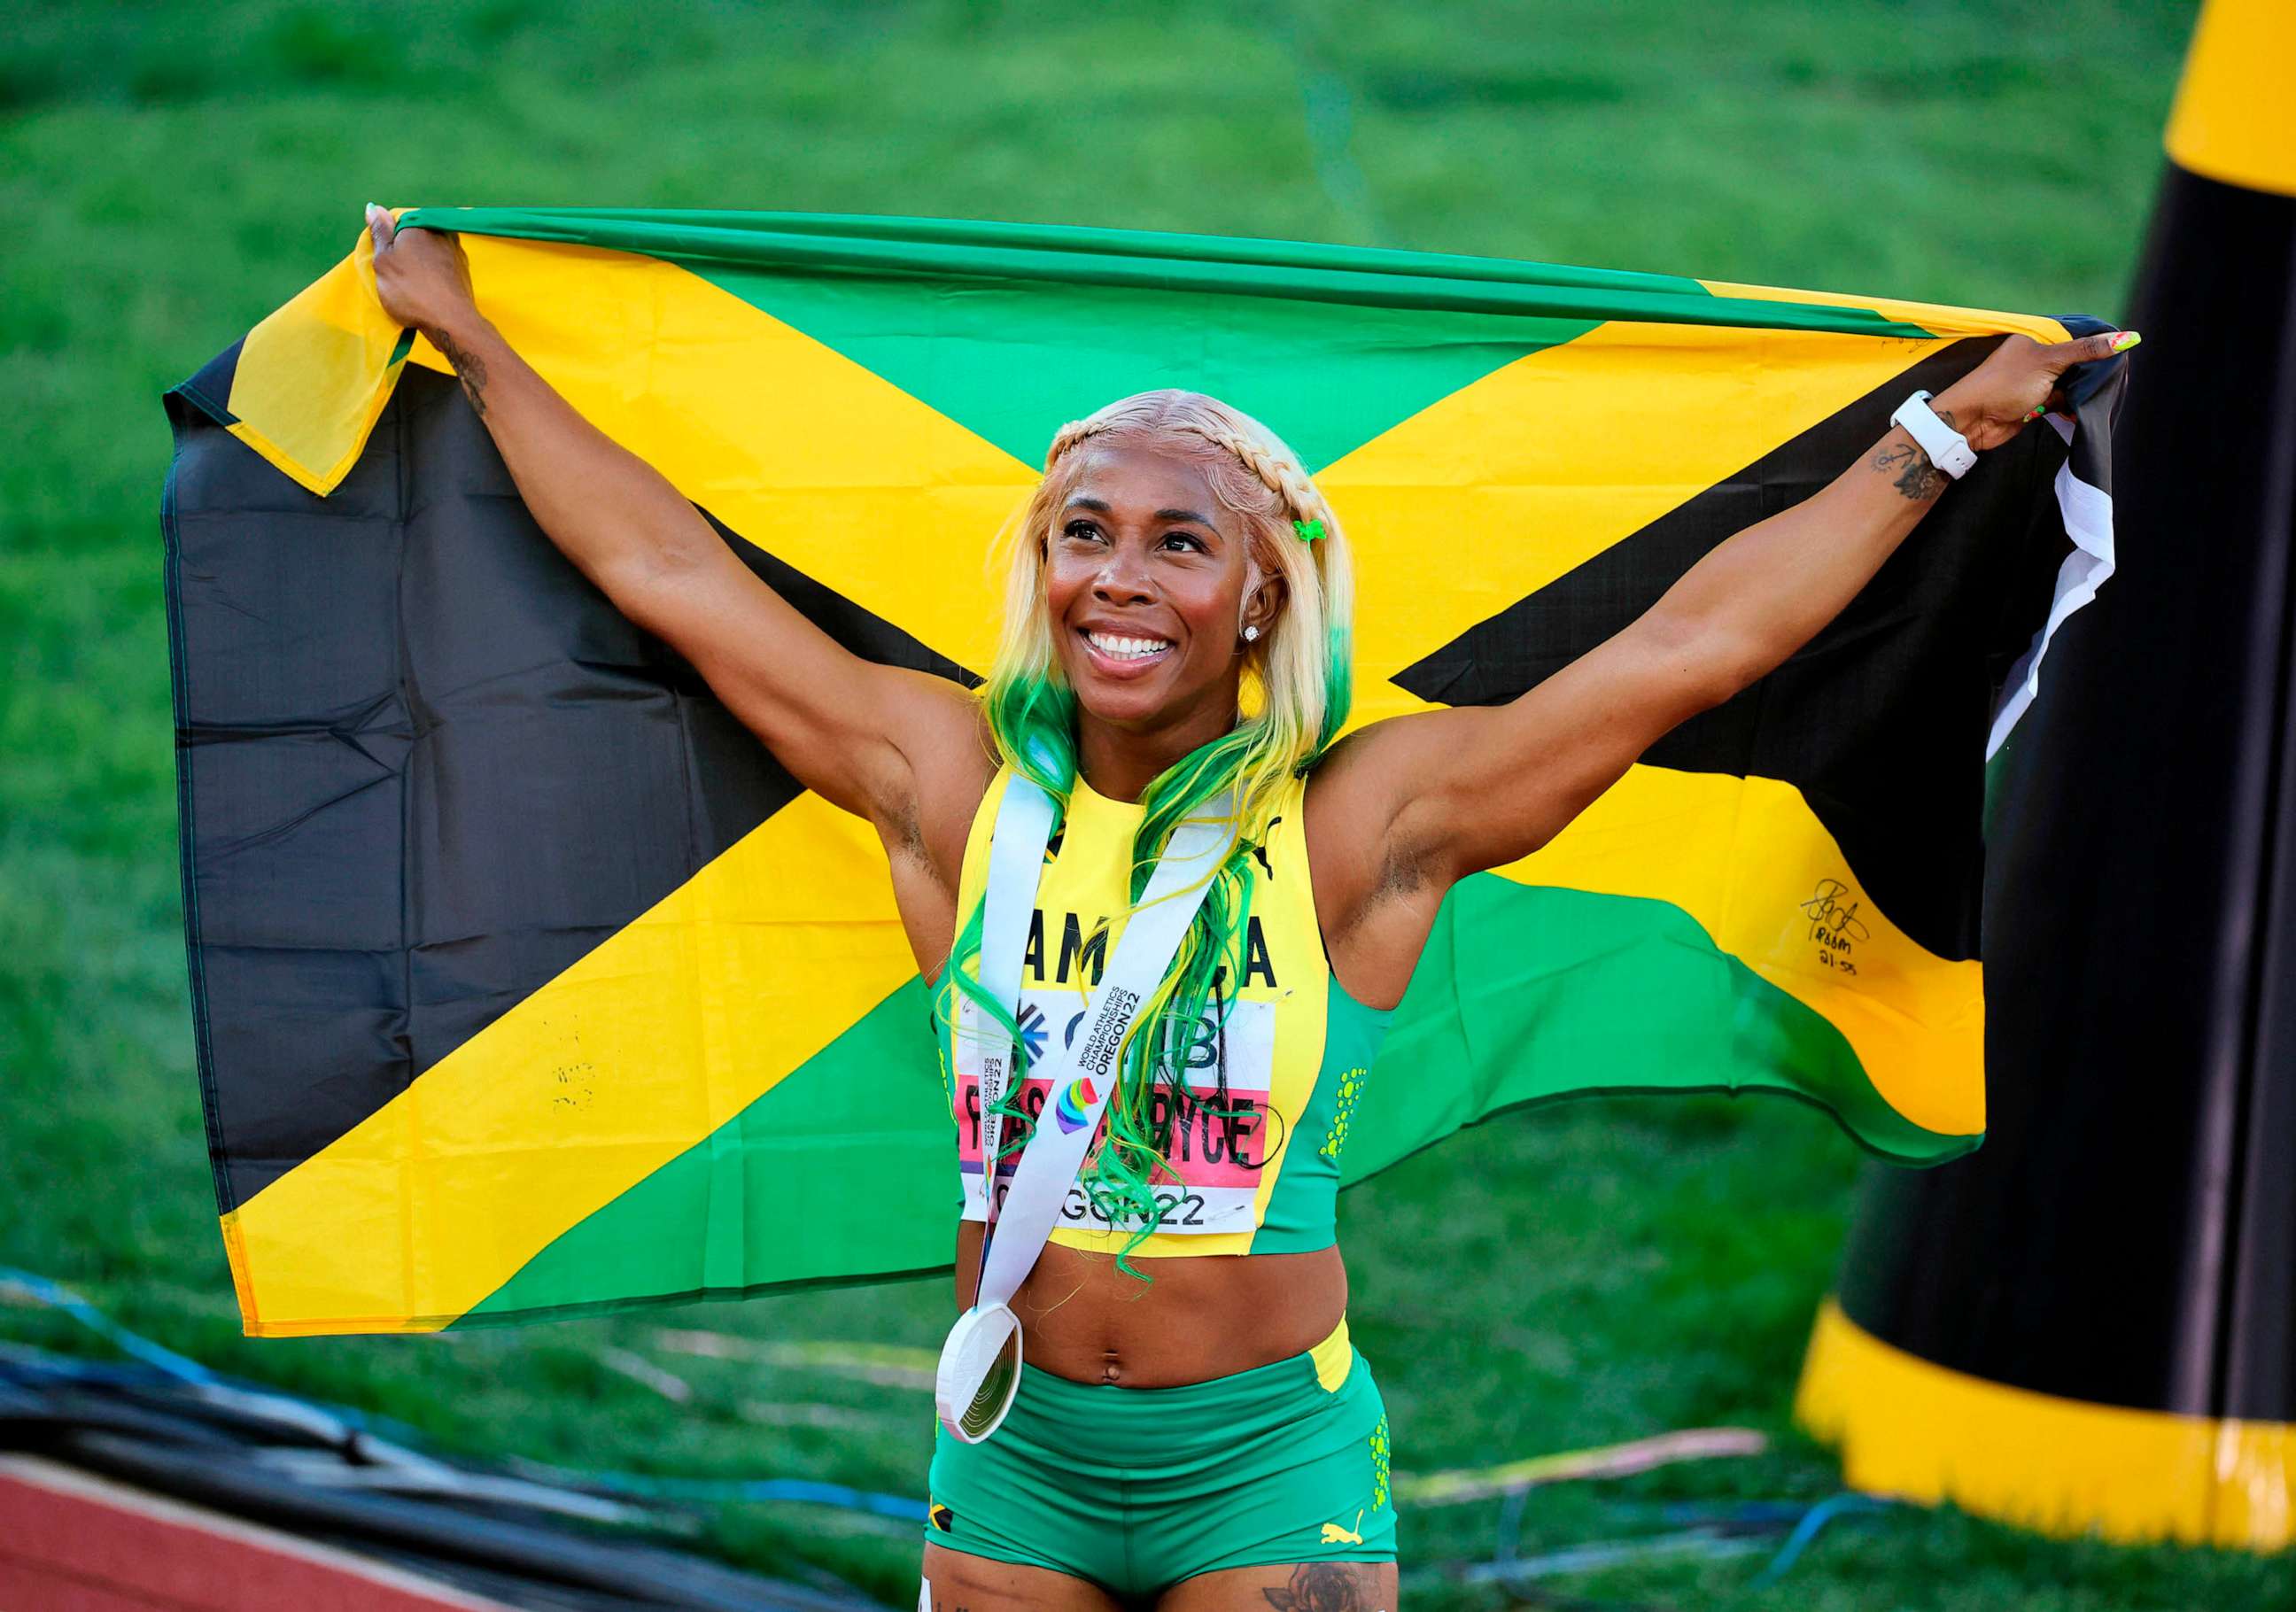 Olympian Shelly-Ann Fraser-Pryce dominates at son's sports day